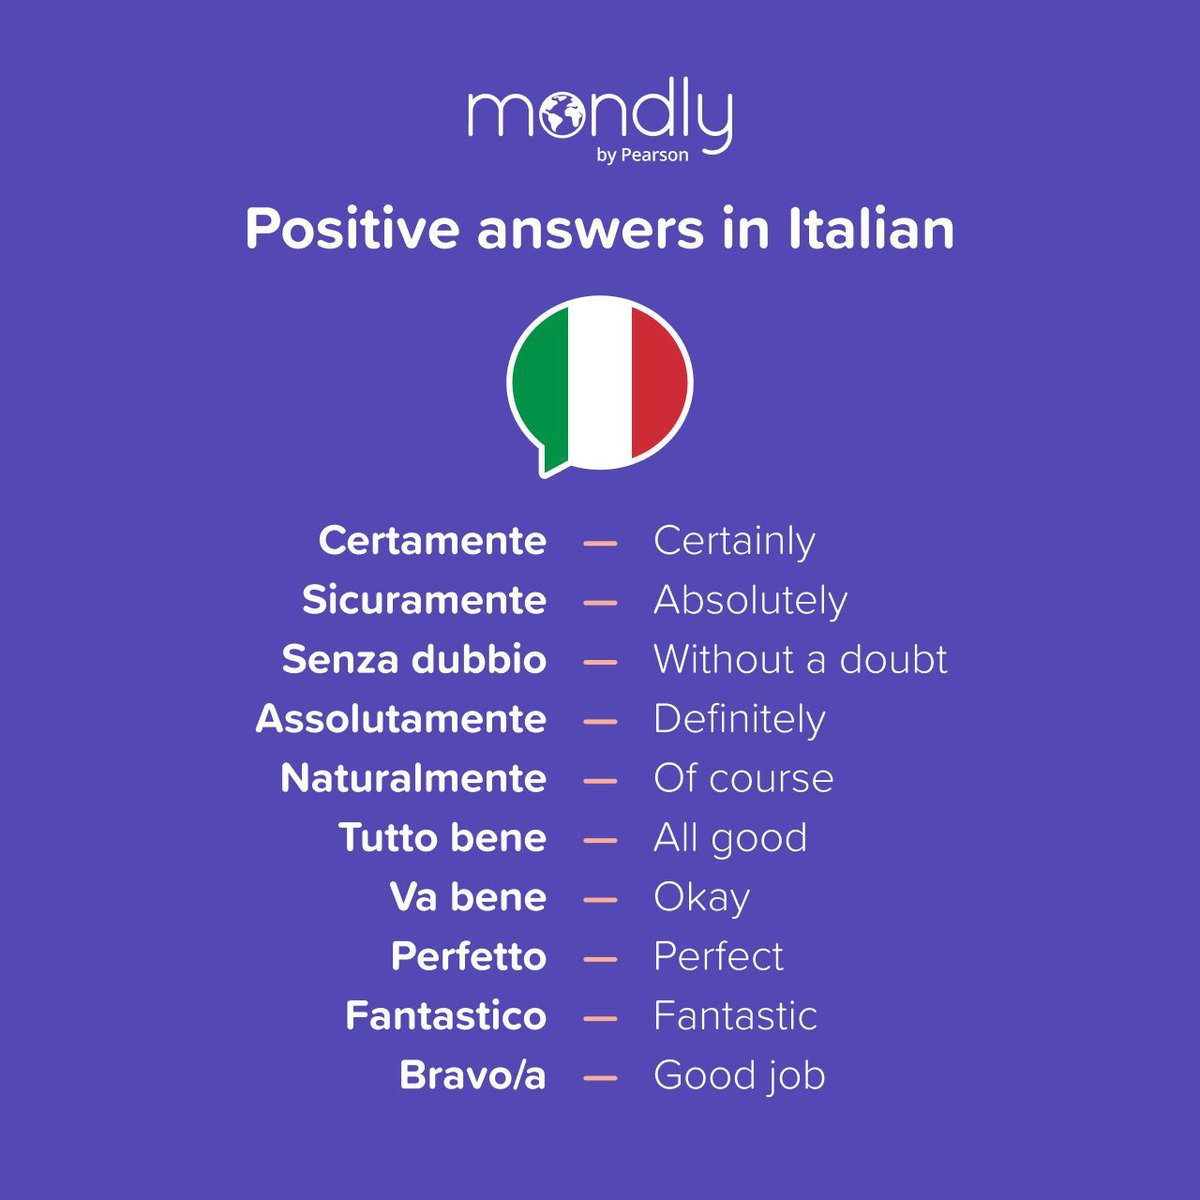 Sì, certo! 🥳 Boost your Italian vocab with positive expressions that stand out! ✅ #italian #learnitalian #yes